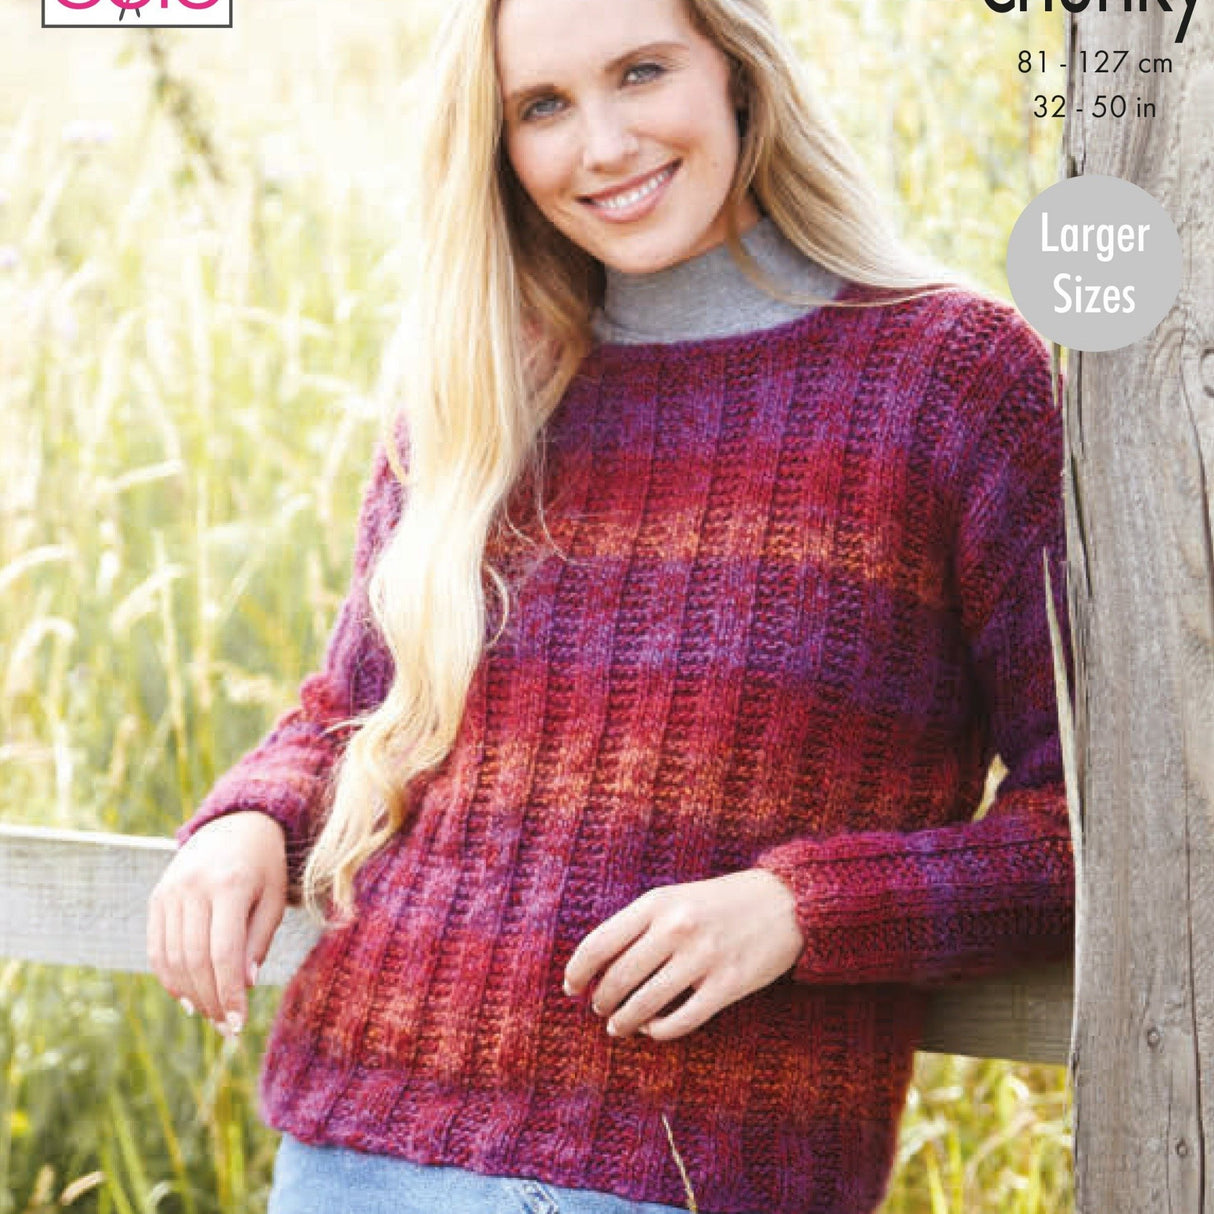 King Cole Patterns King Cole Ladies Chunky Knitting Pattern 5816